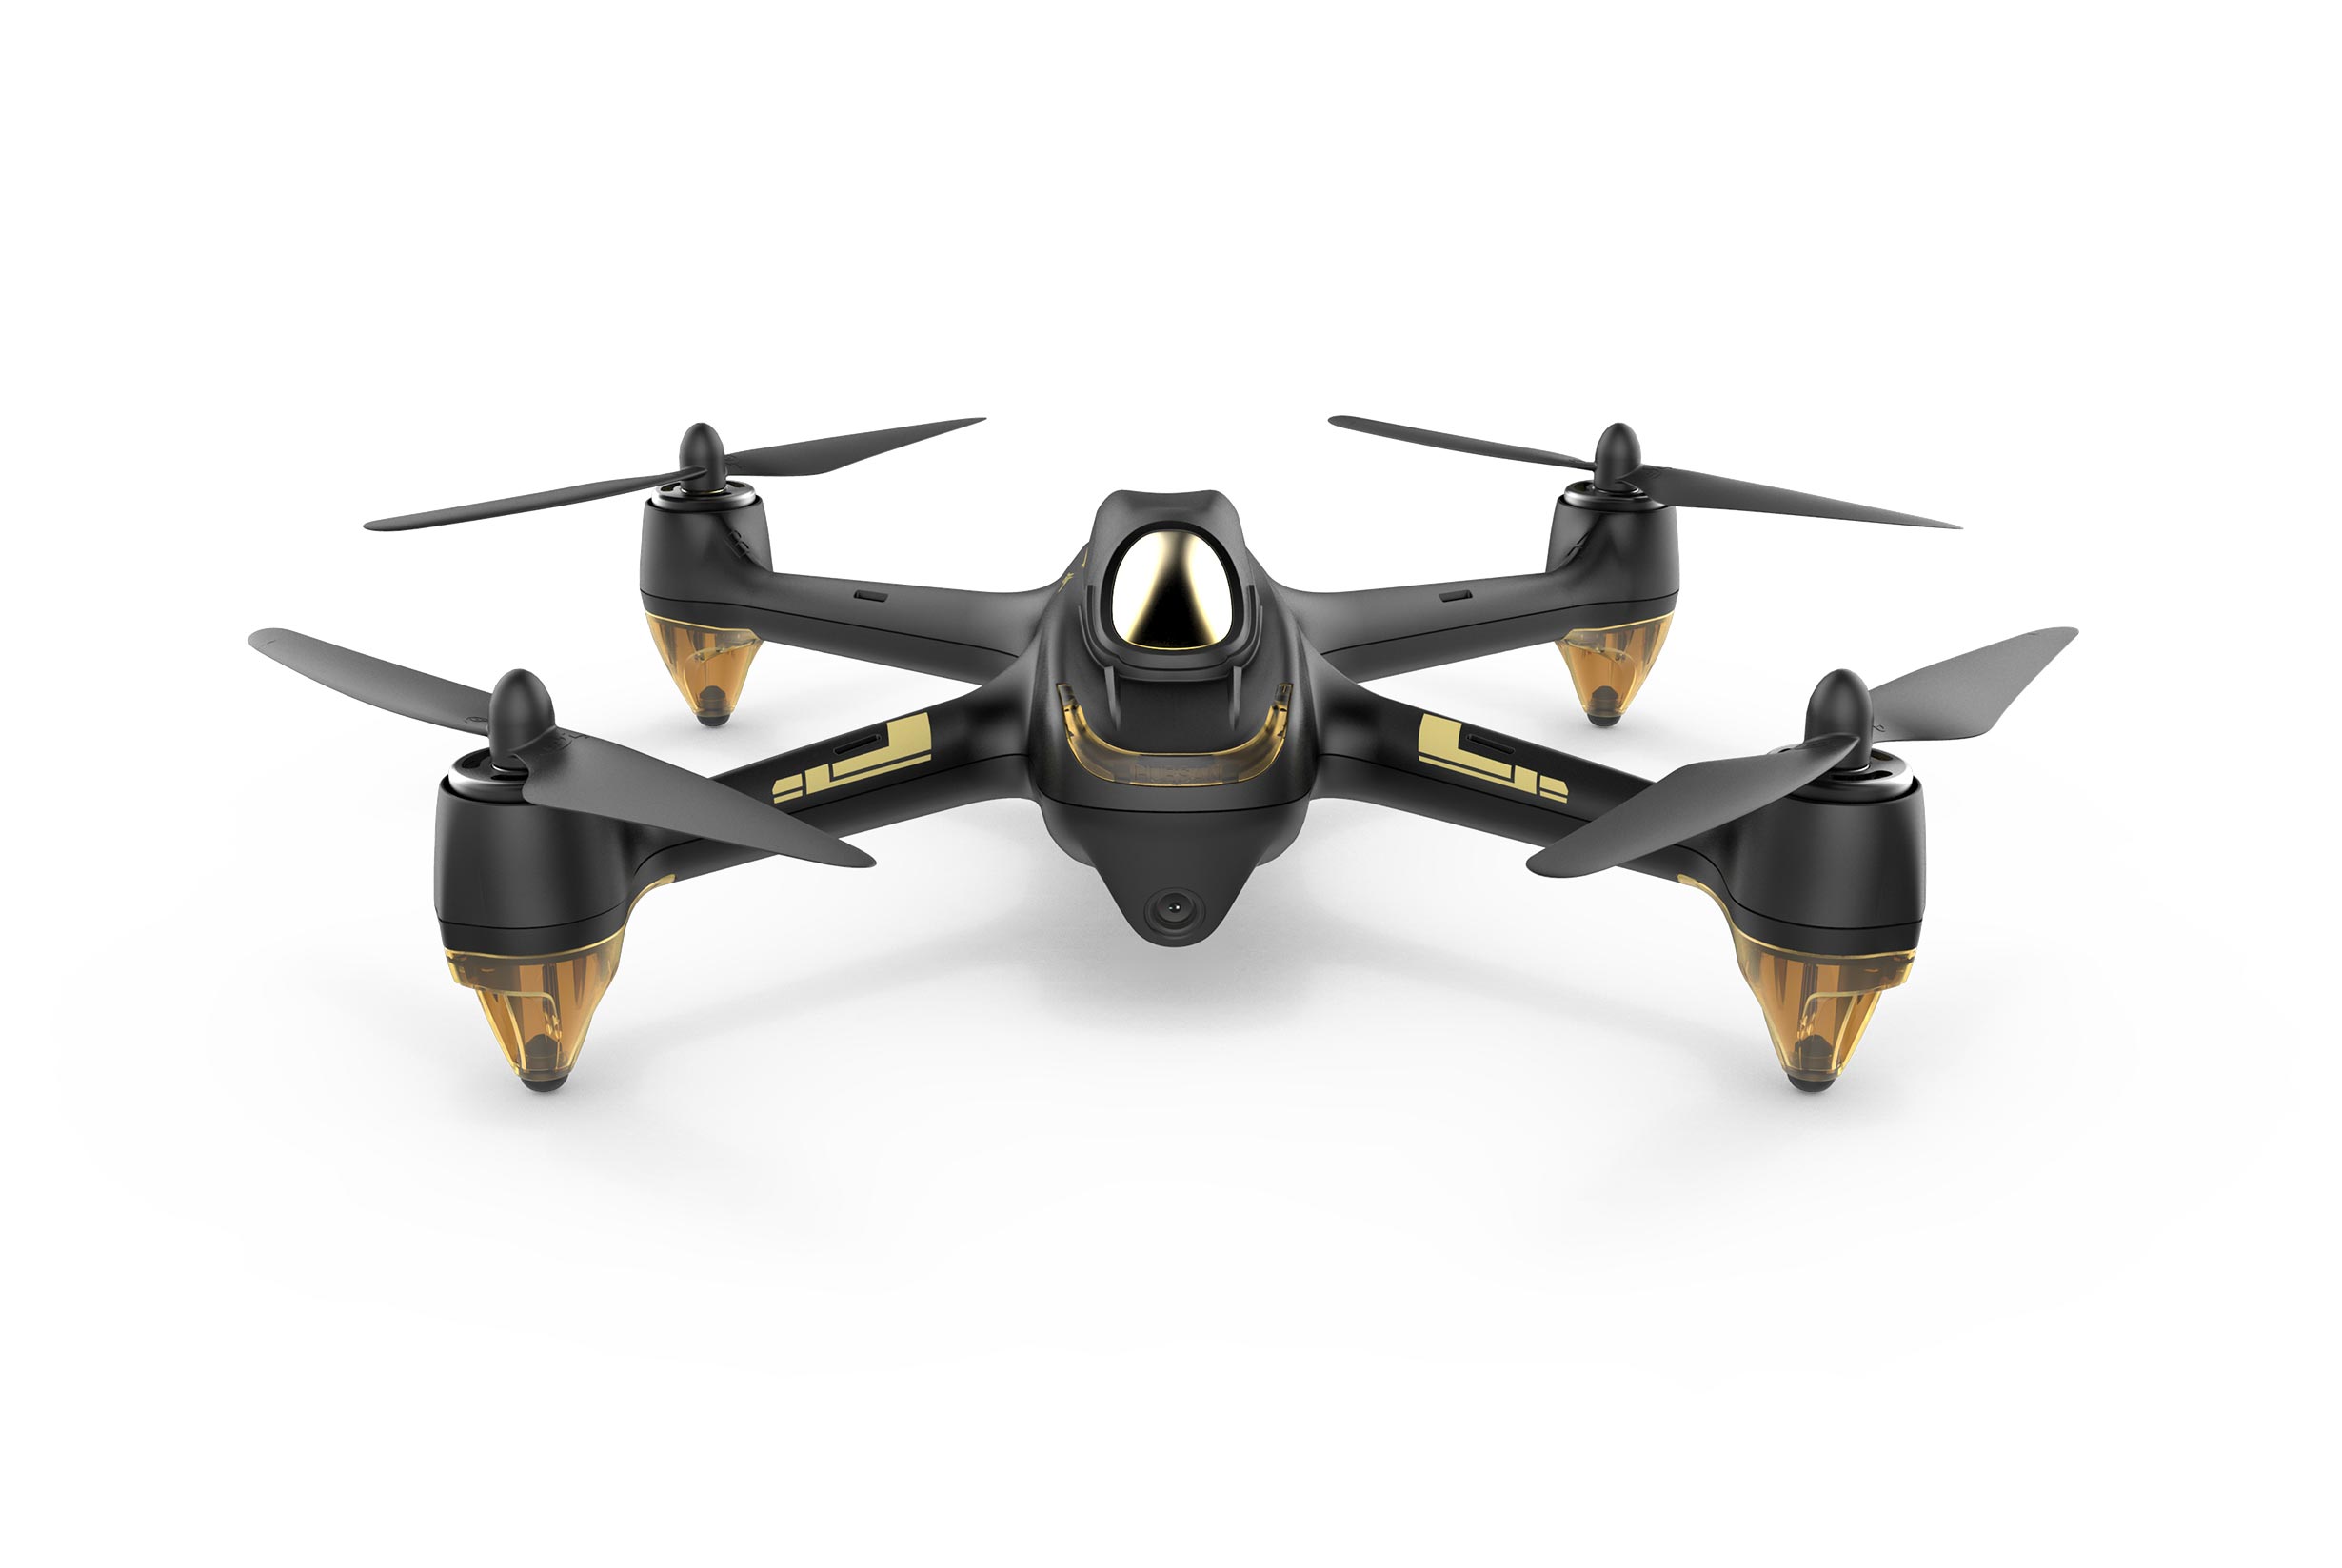 Hubsan H501S SX4 Drone FPV Brushless 1080P Camera Quadcopter GPS RTF,PRO Edition 